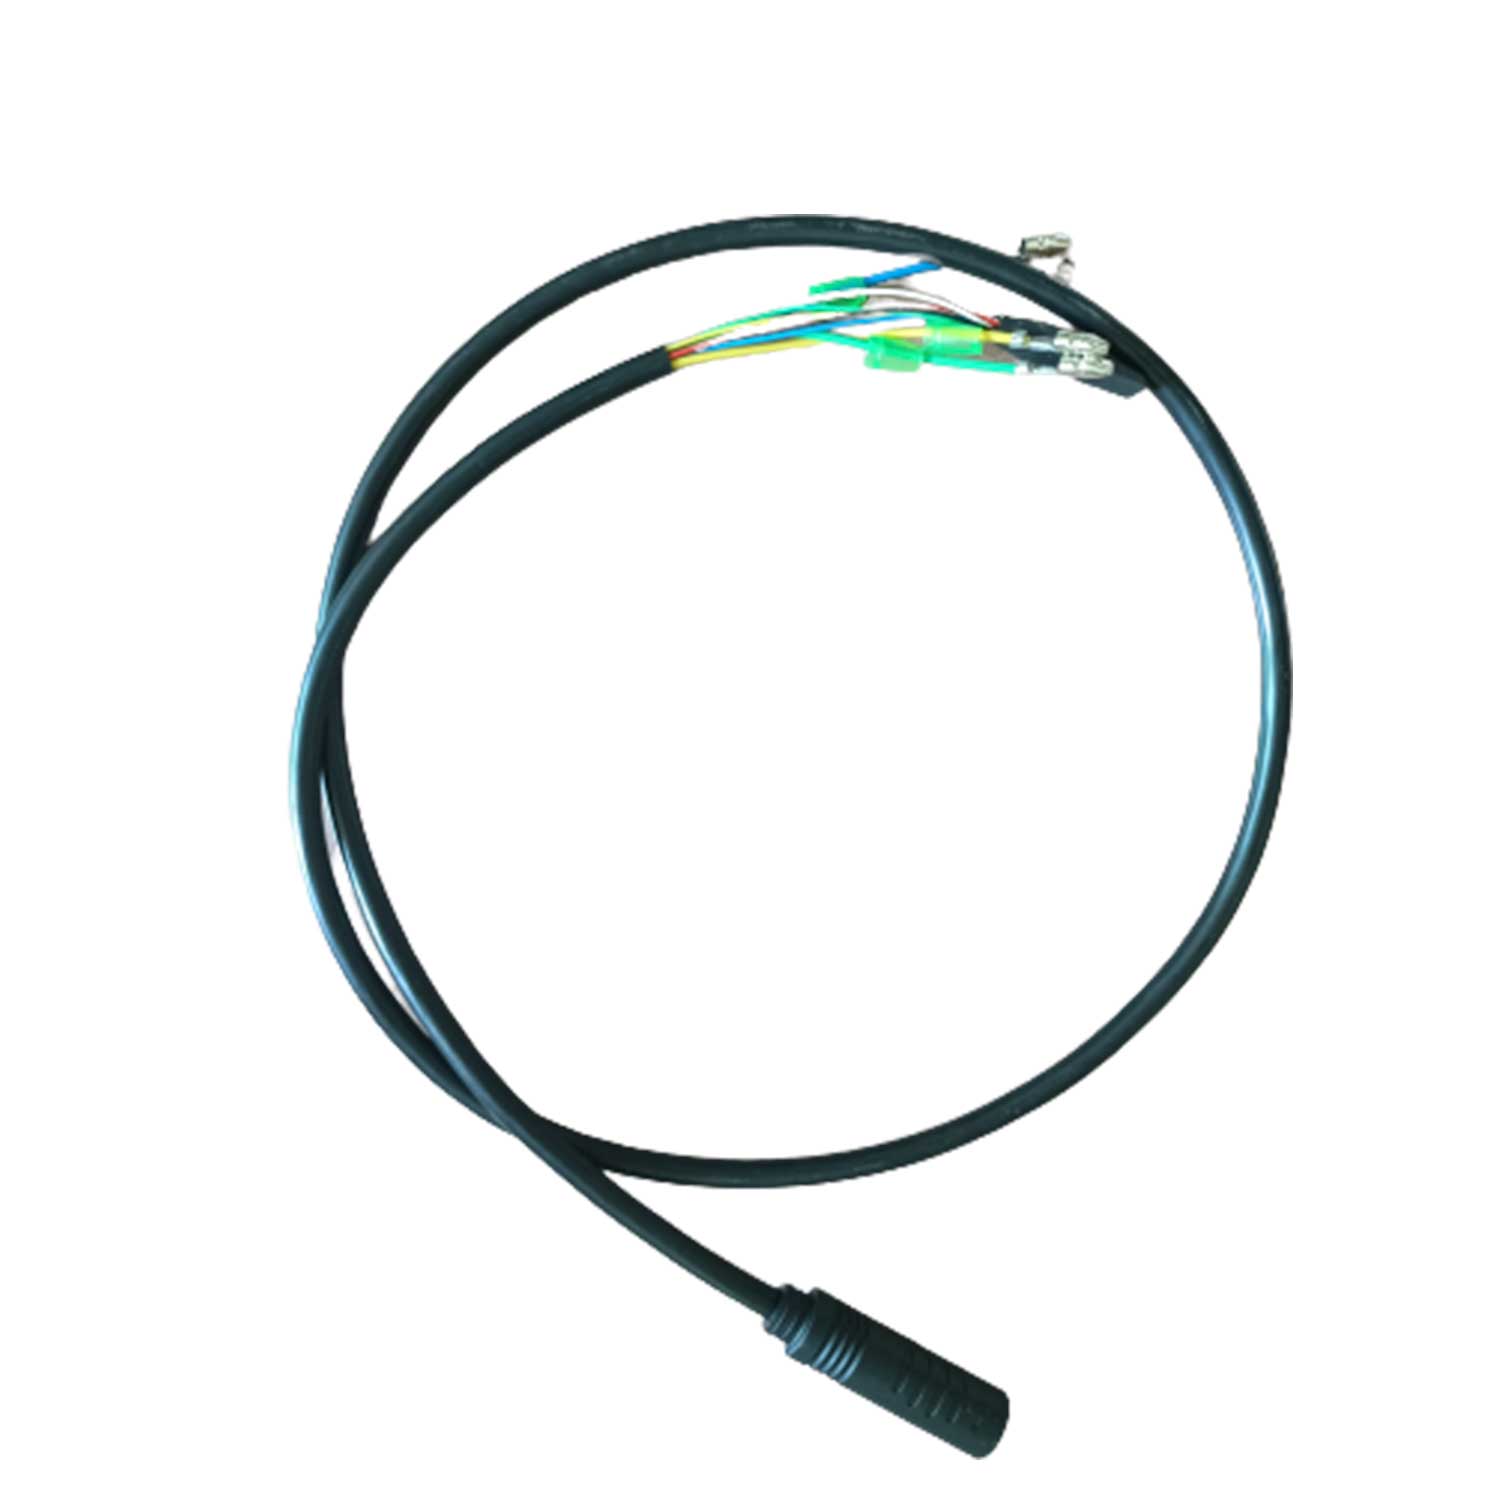 Motor Quick release Cable | A6AH26 350W